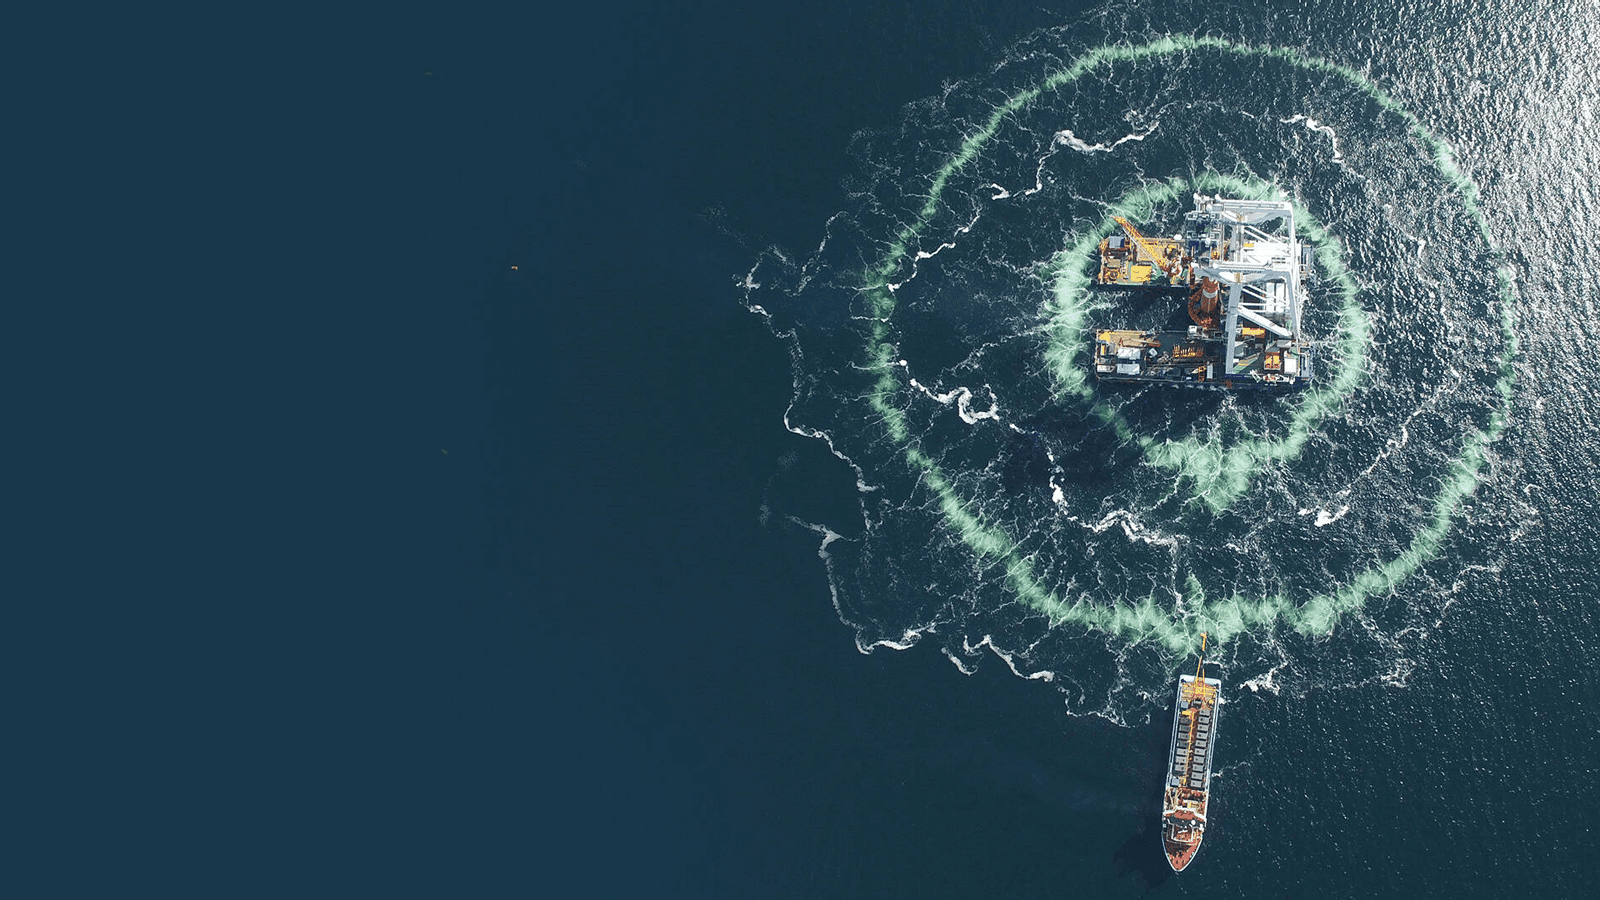 A double bubble curtain is deployed around heavy lift installation vessel Svanen (Picture: Van Oord)